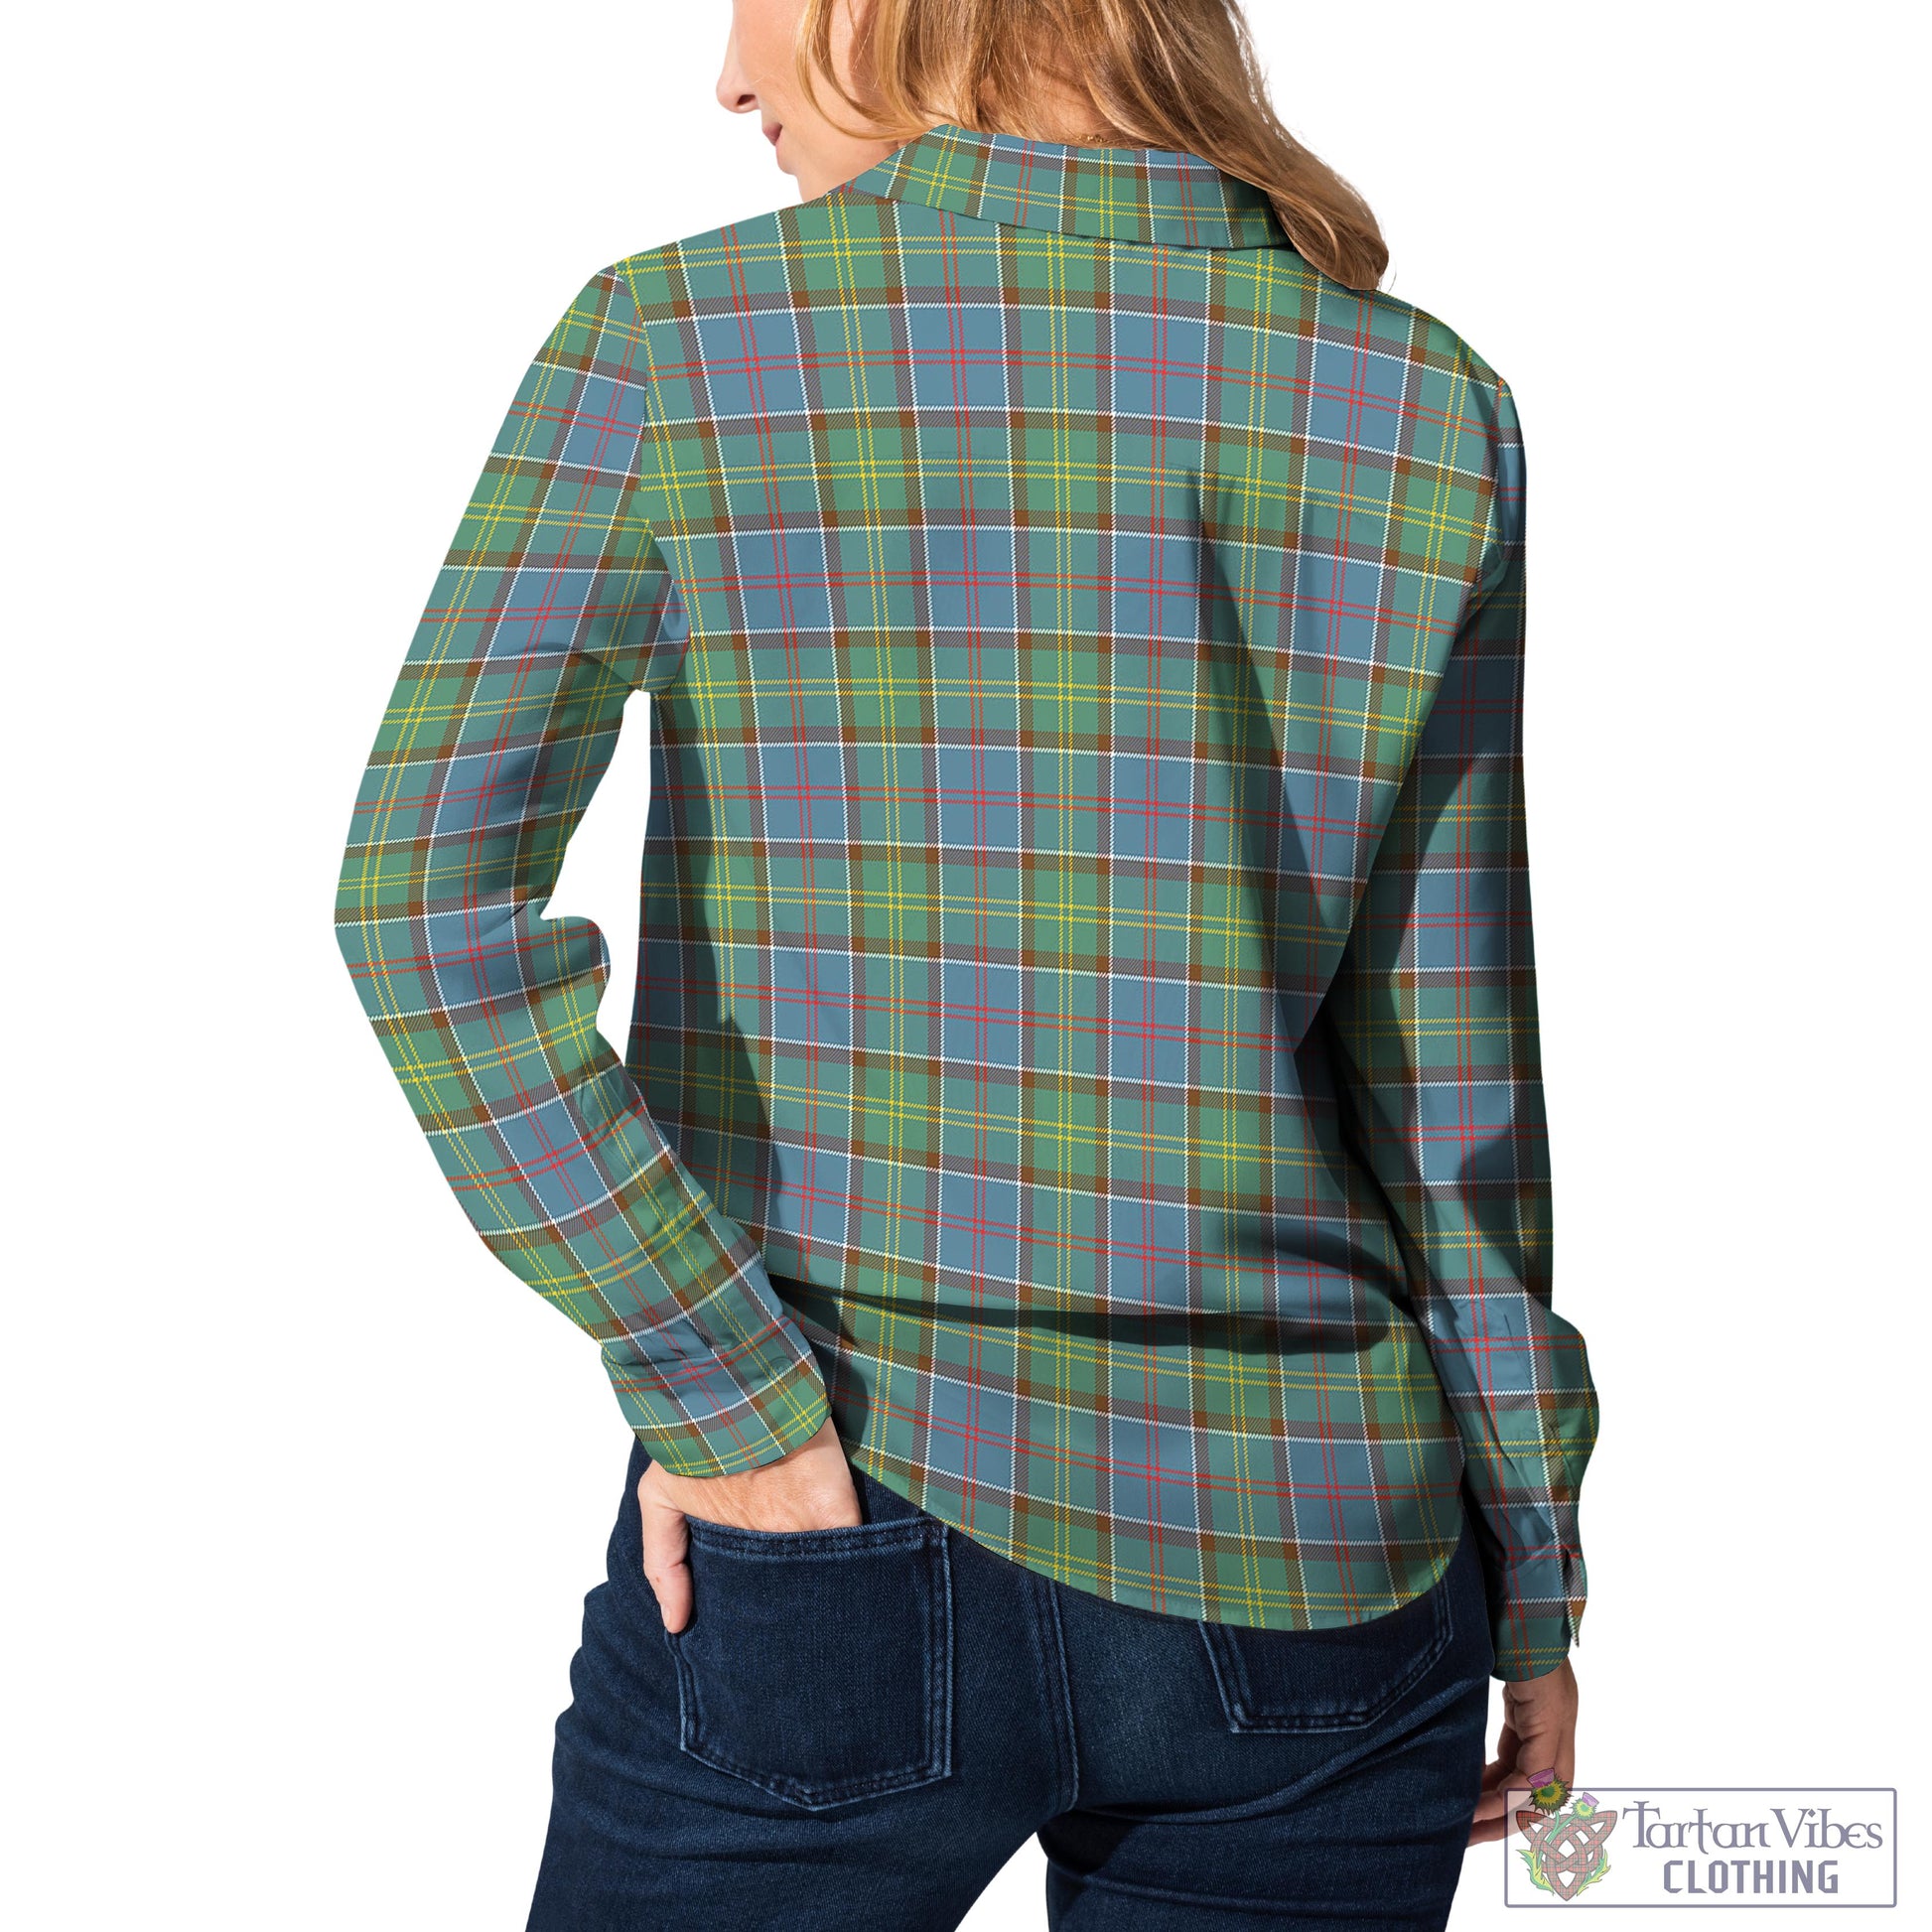 Tartan Vibes Clothing Whitelaw Tartan Womens Casual Shirt with Family Crest